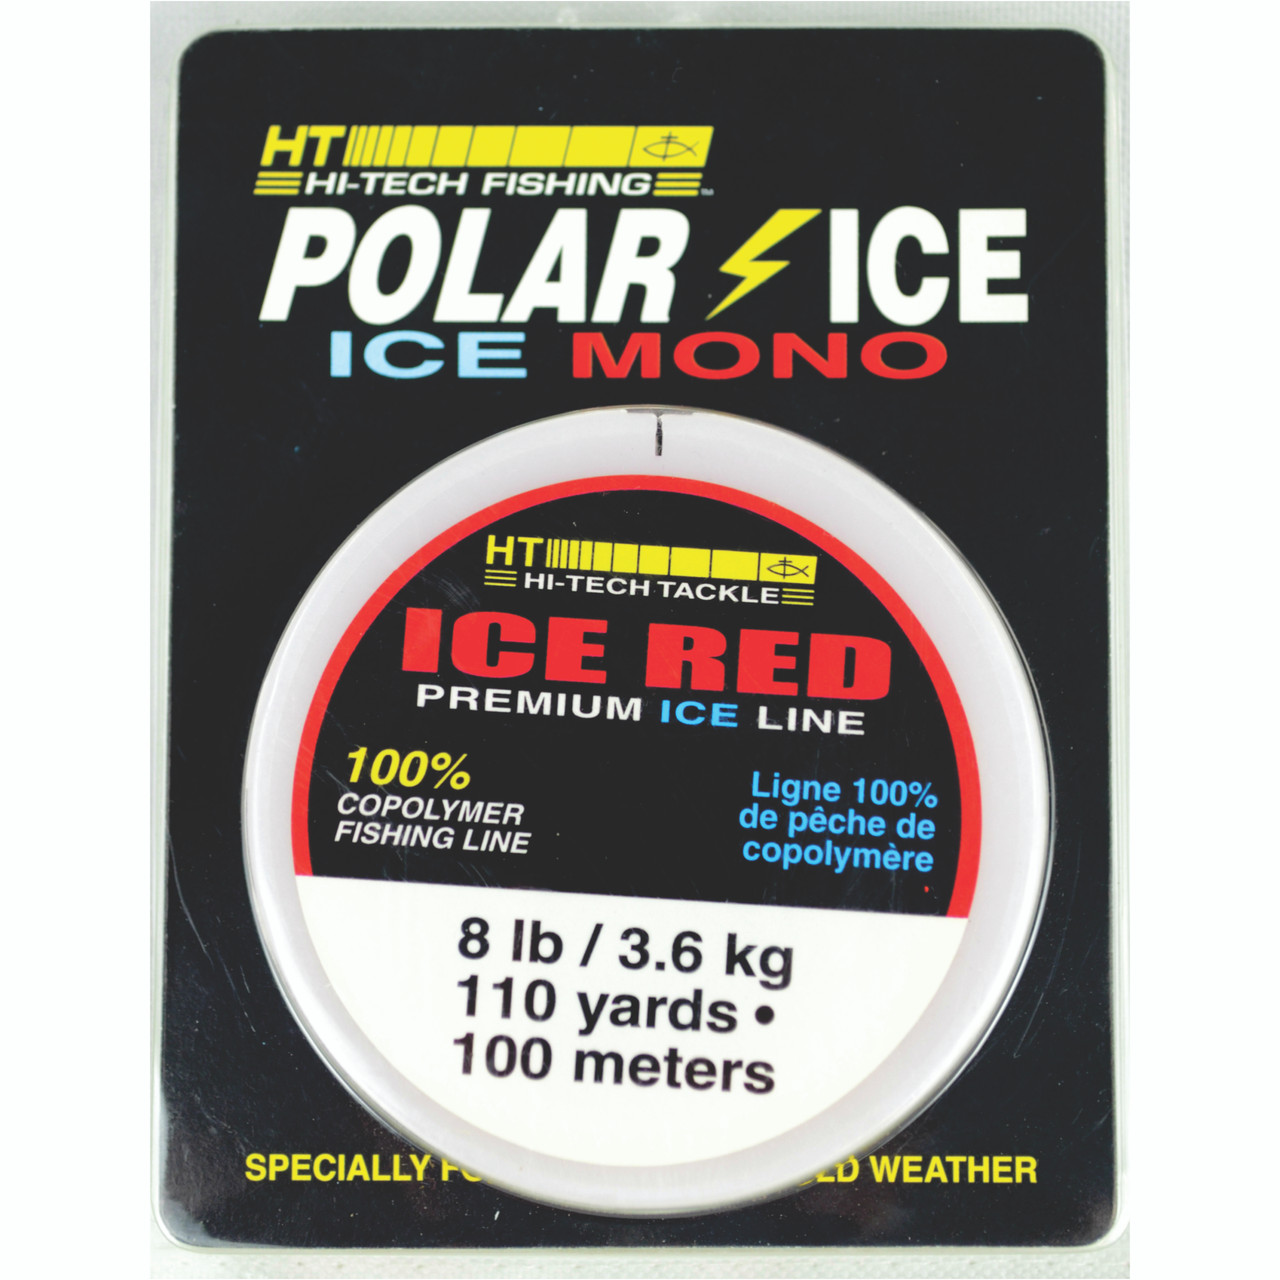 ICE RED FISHING LINE 8# TEST - 110 YARDS PER SPOOL 